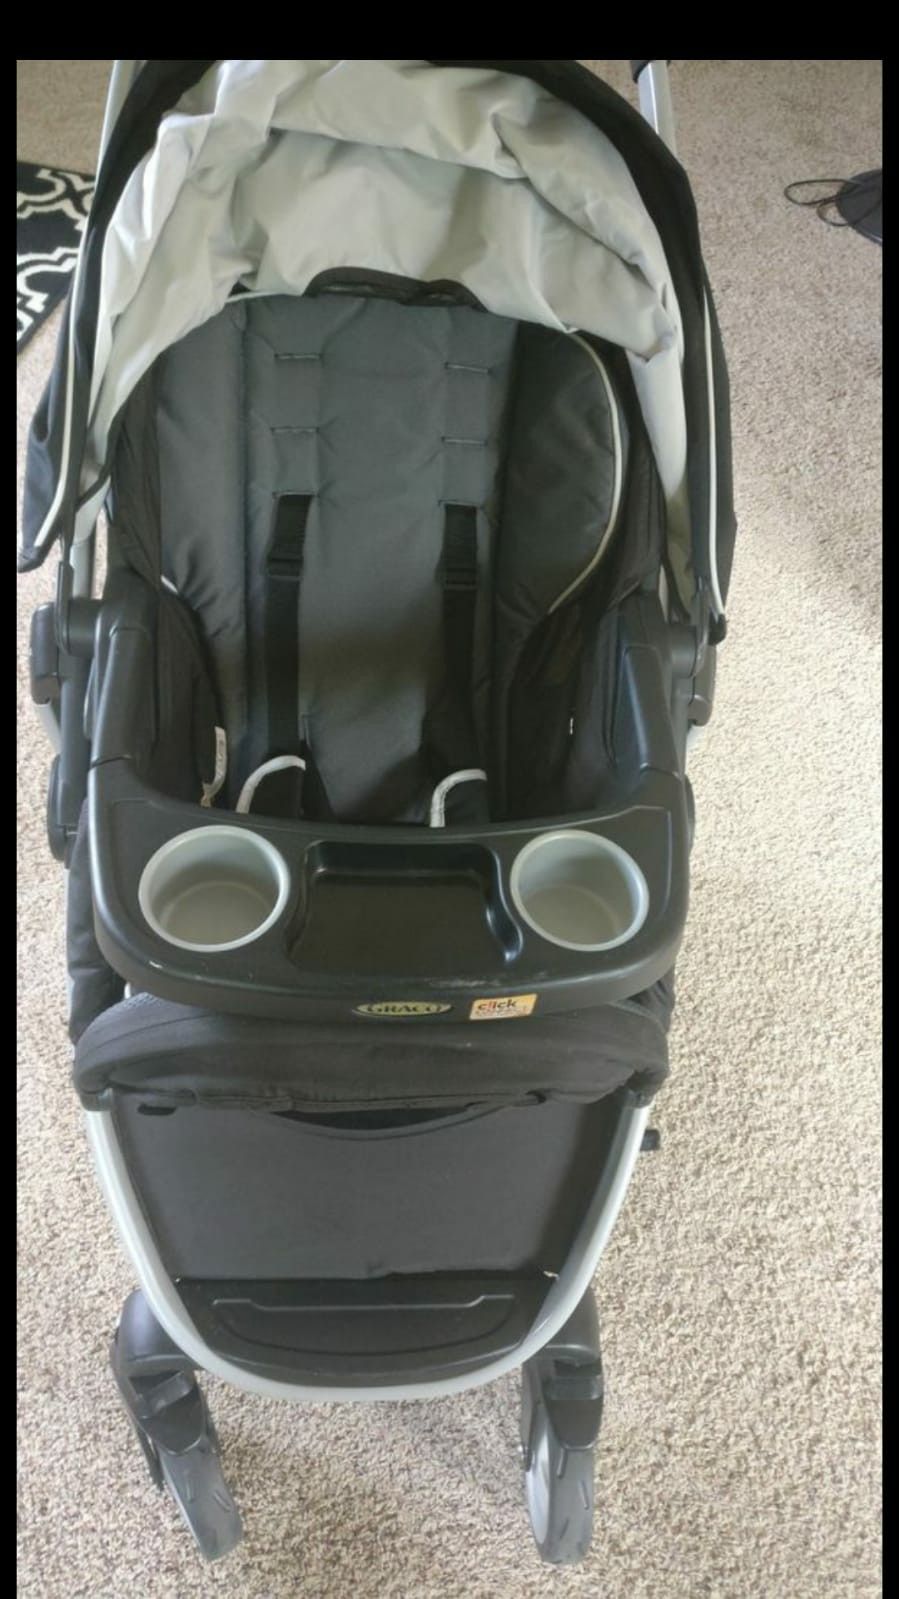 Stroller for babies and toddlers . Adjustable